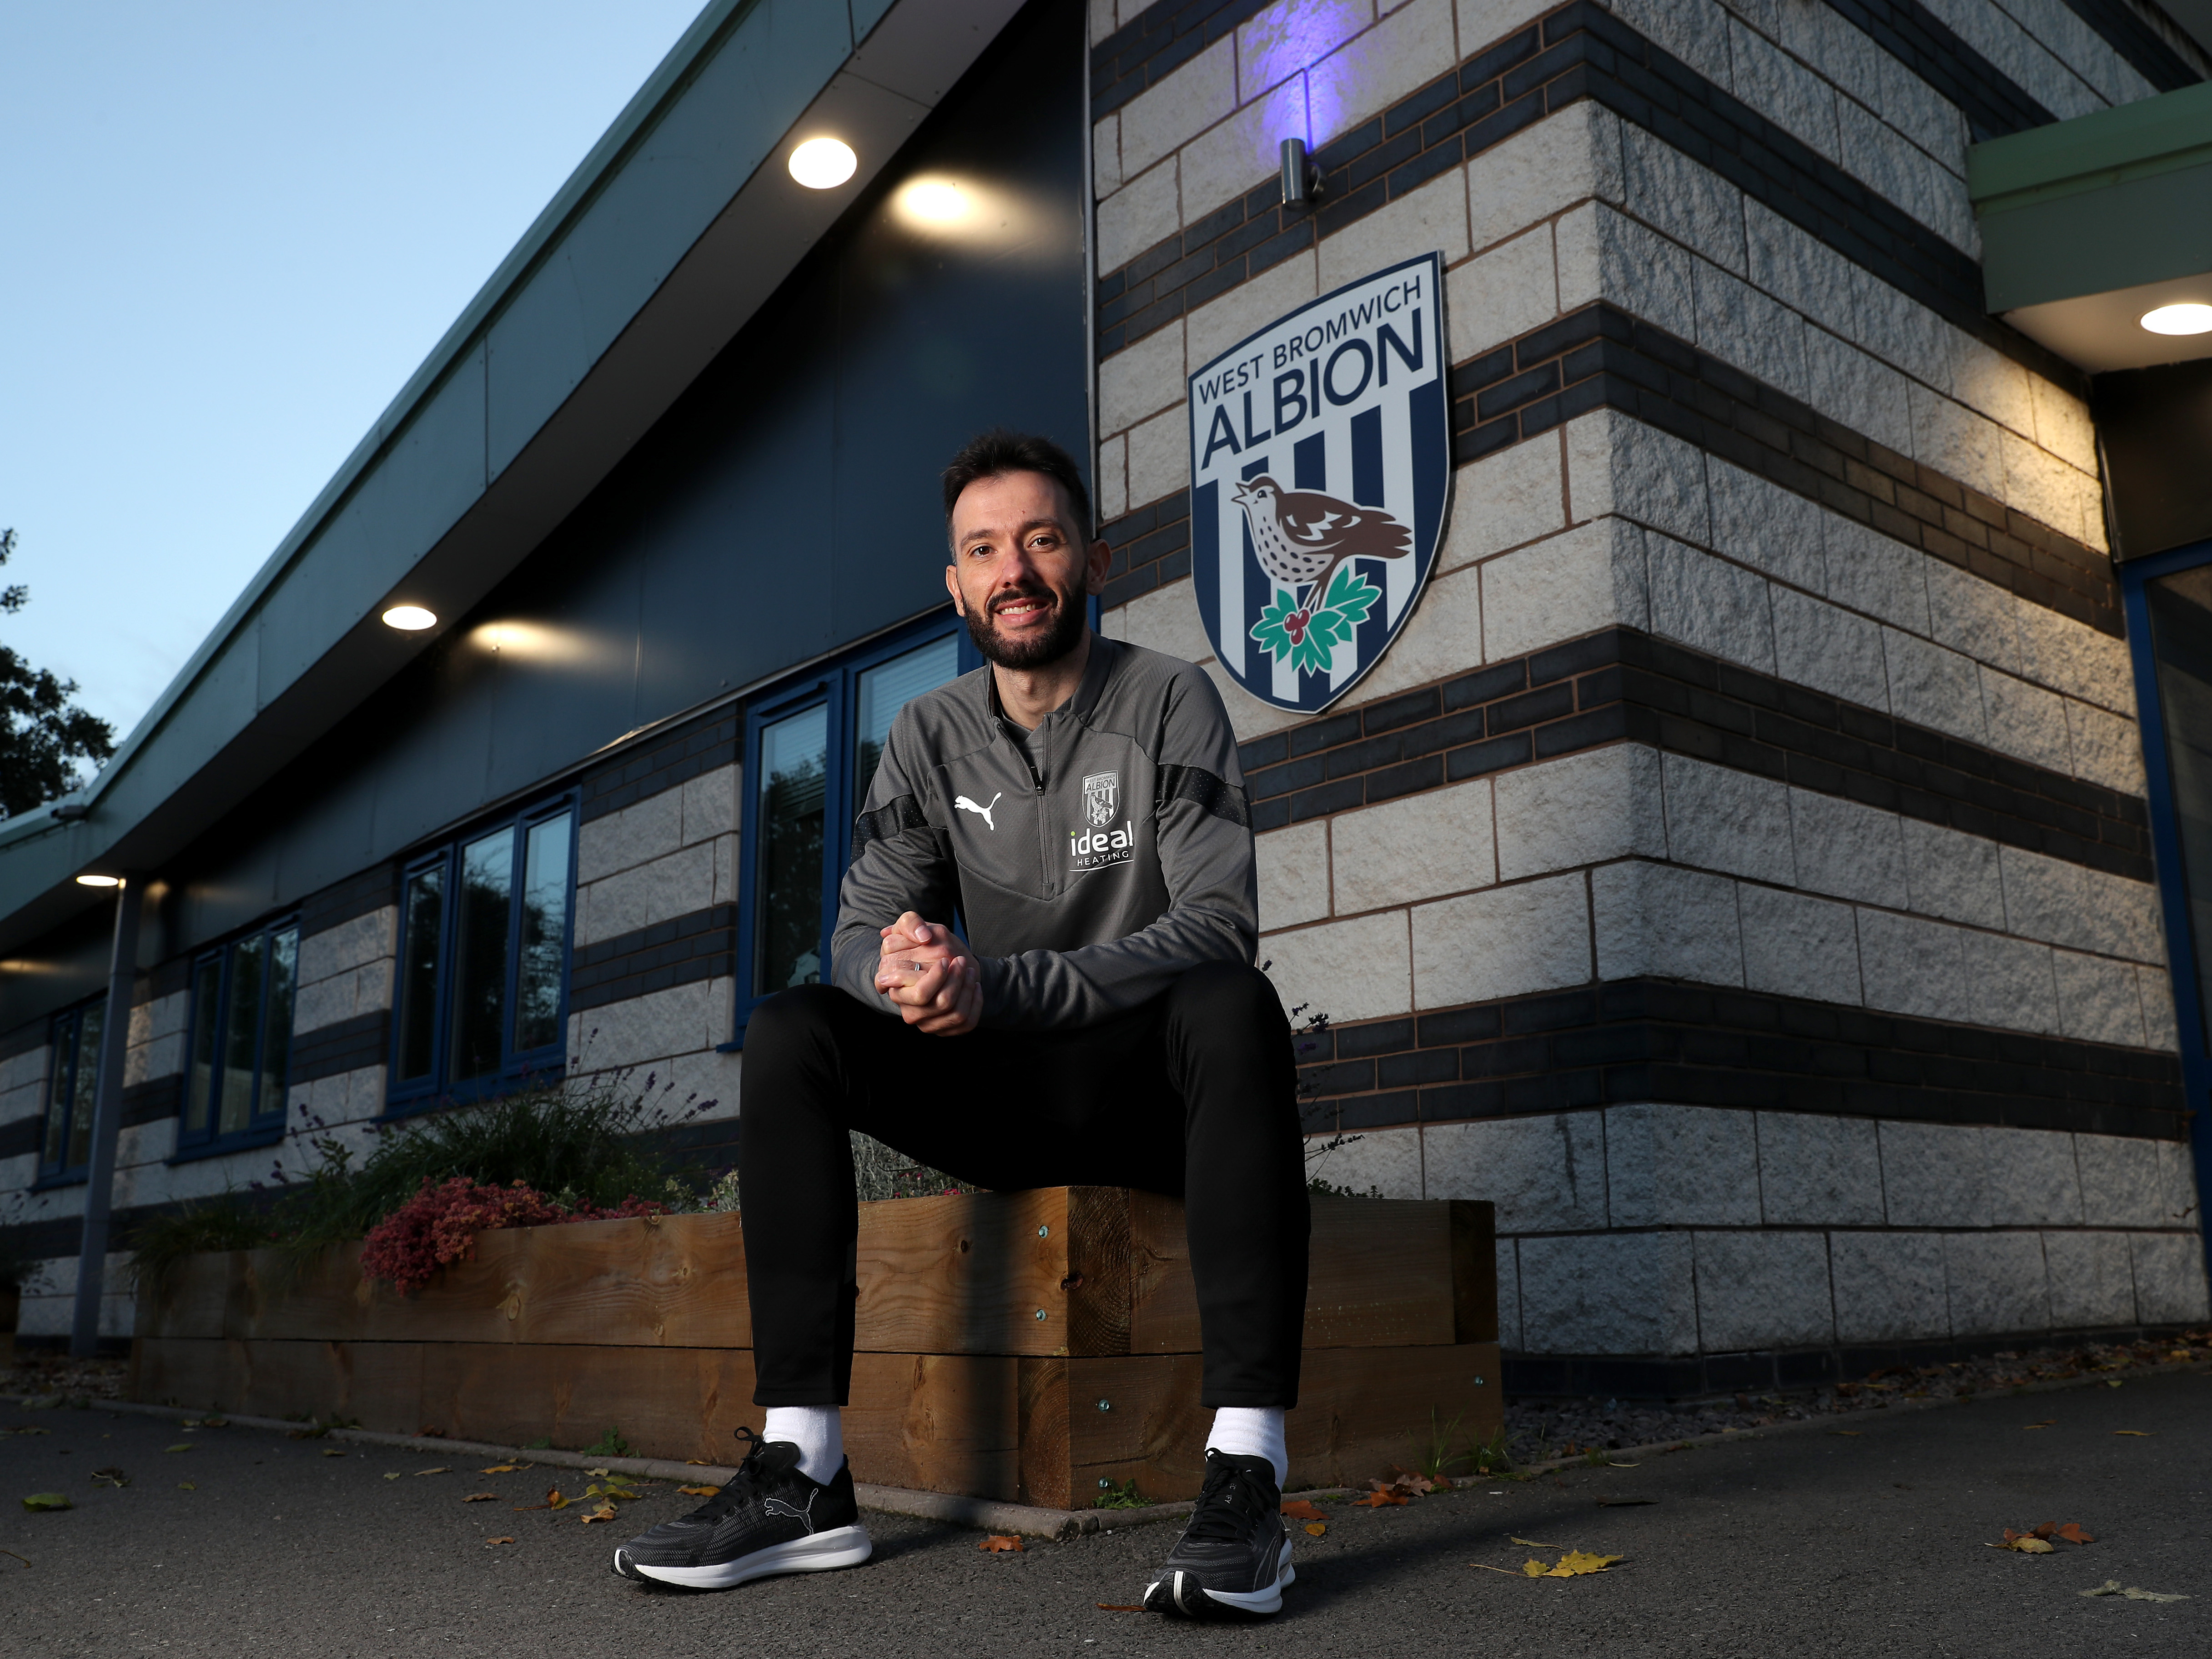 Carlos Corberan sat down smiling at the camera outside Albion's training ground